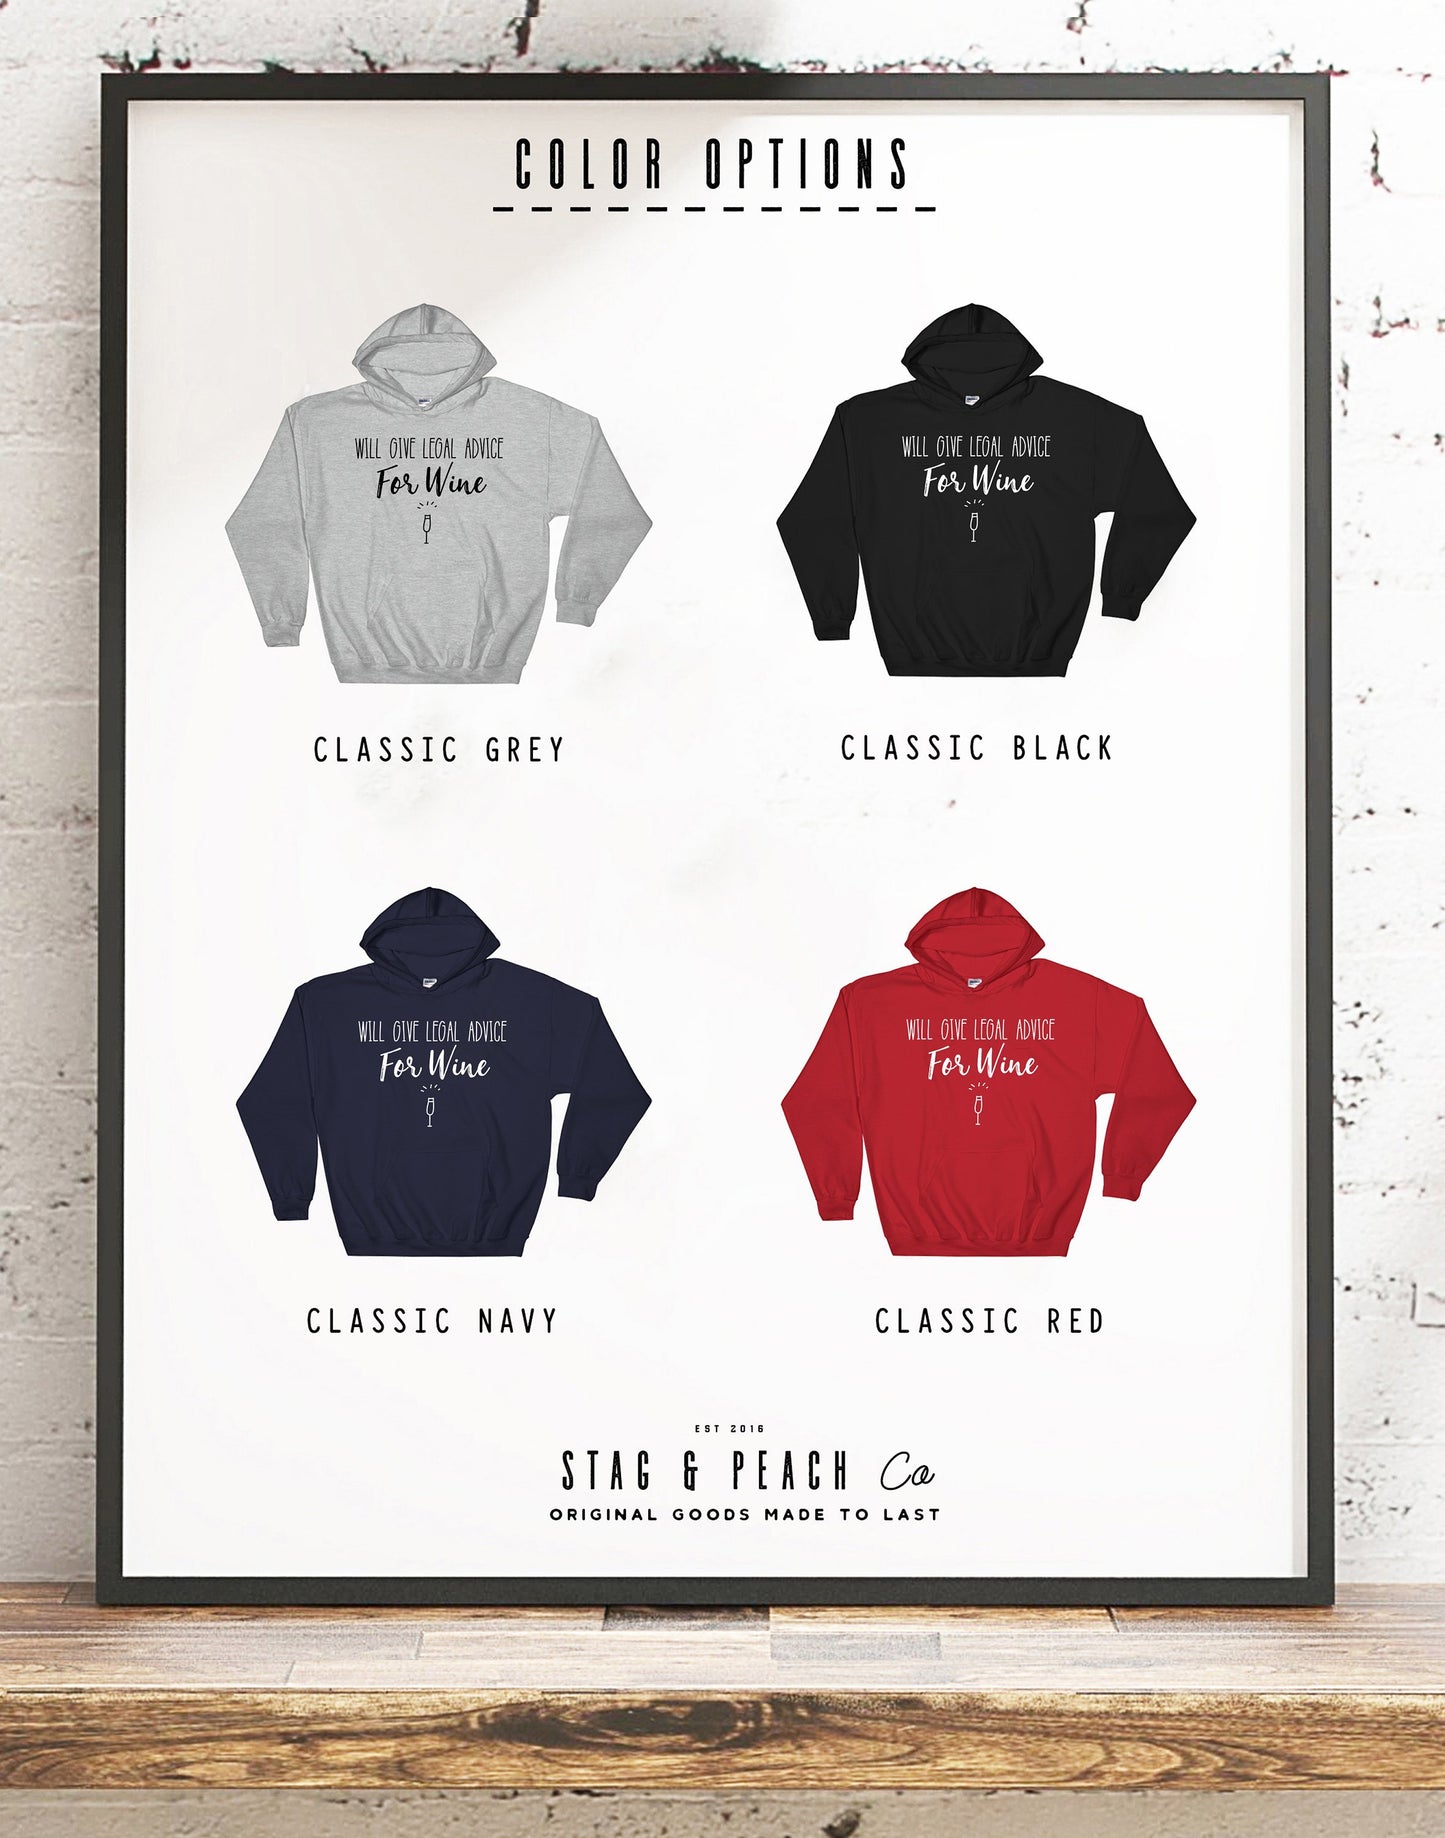 Will Give Legal Advice For Wine Hoodie - Lawyer Shirt, Lawyer Gift, Law School, College Student Gift, Law Student, Graduation, Wine Shirt